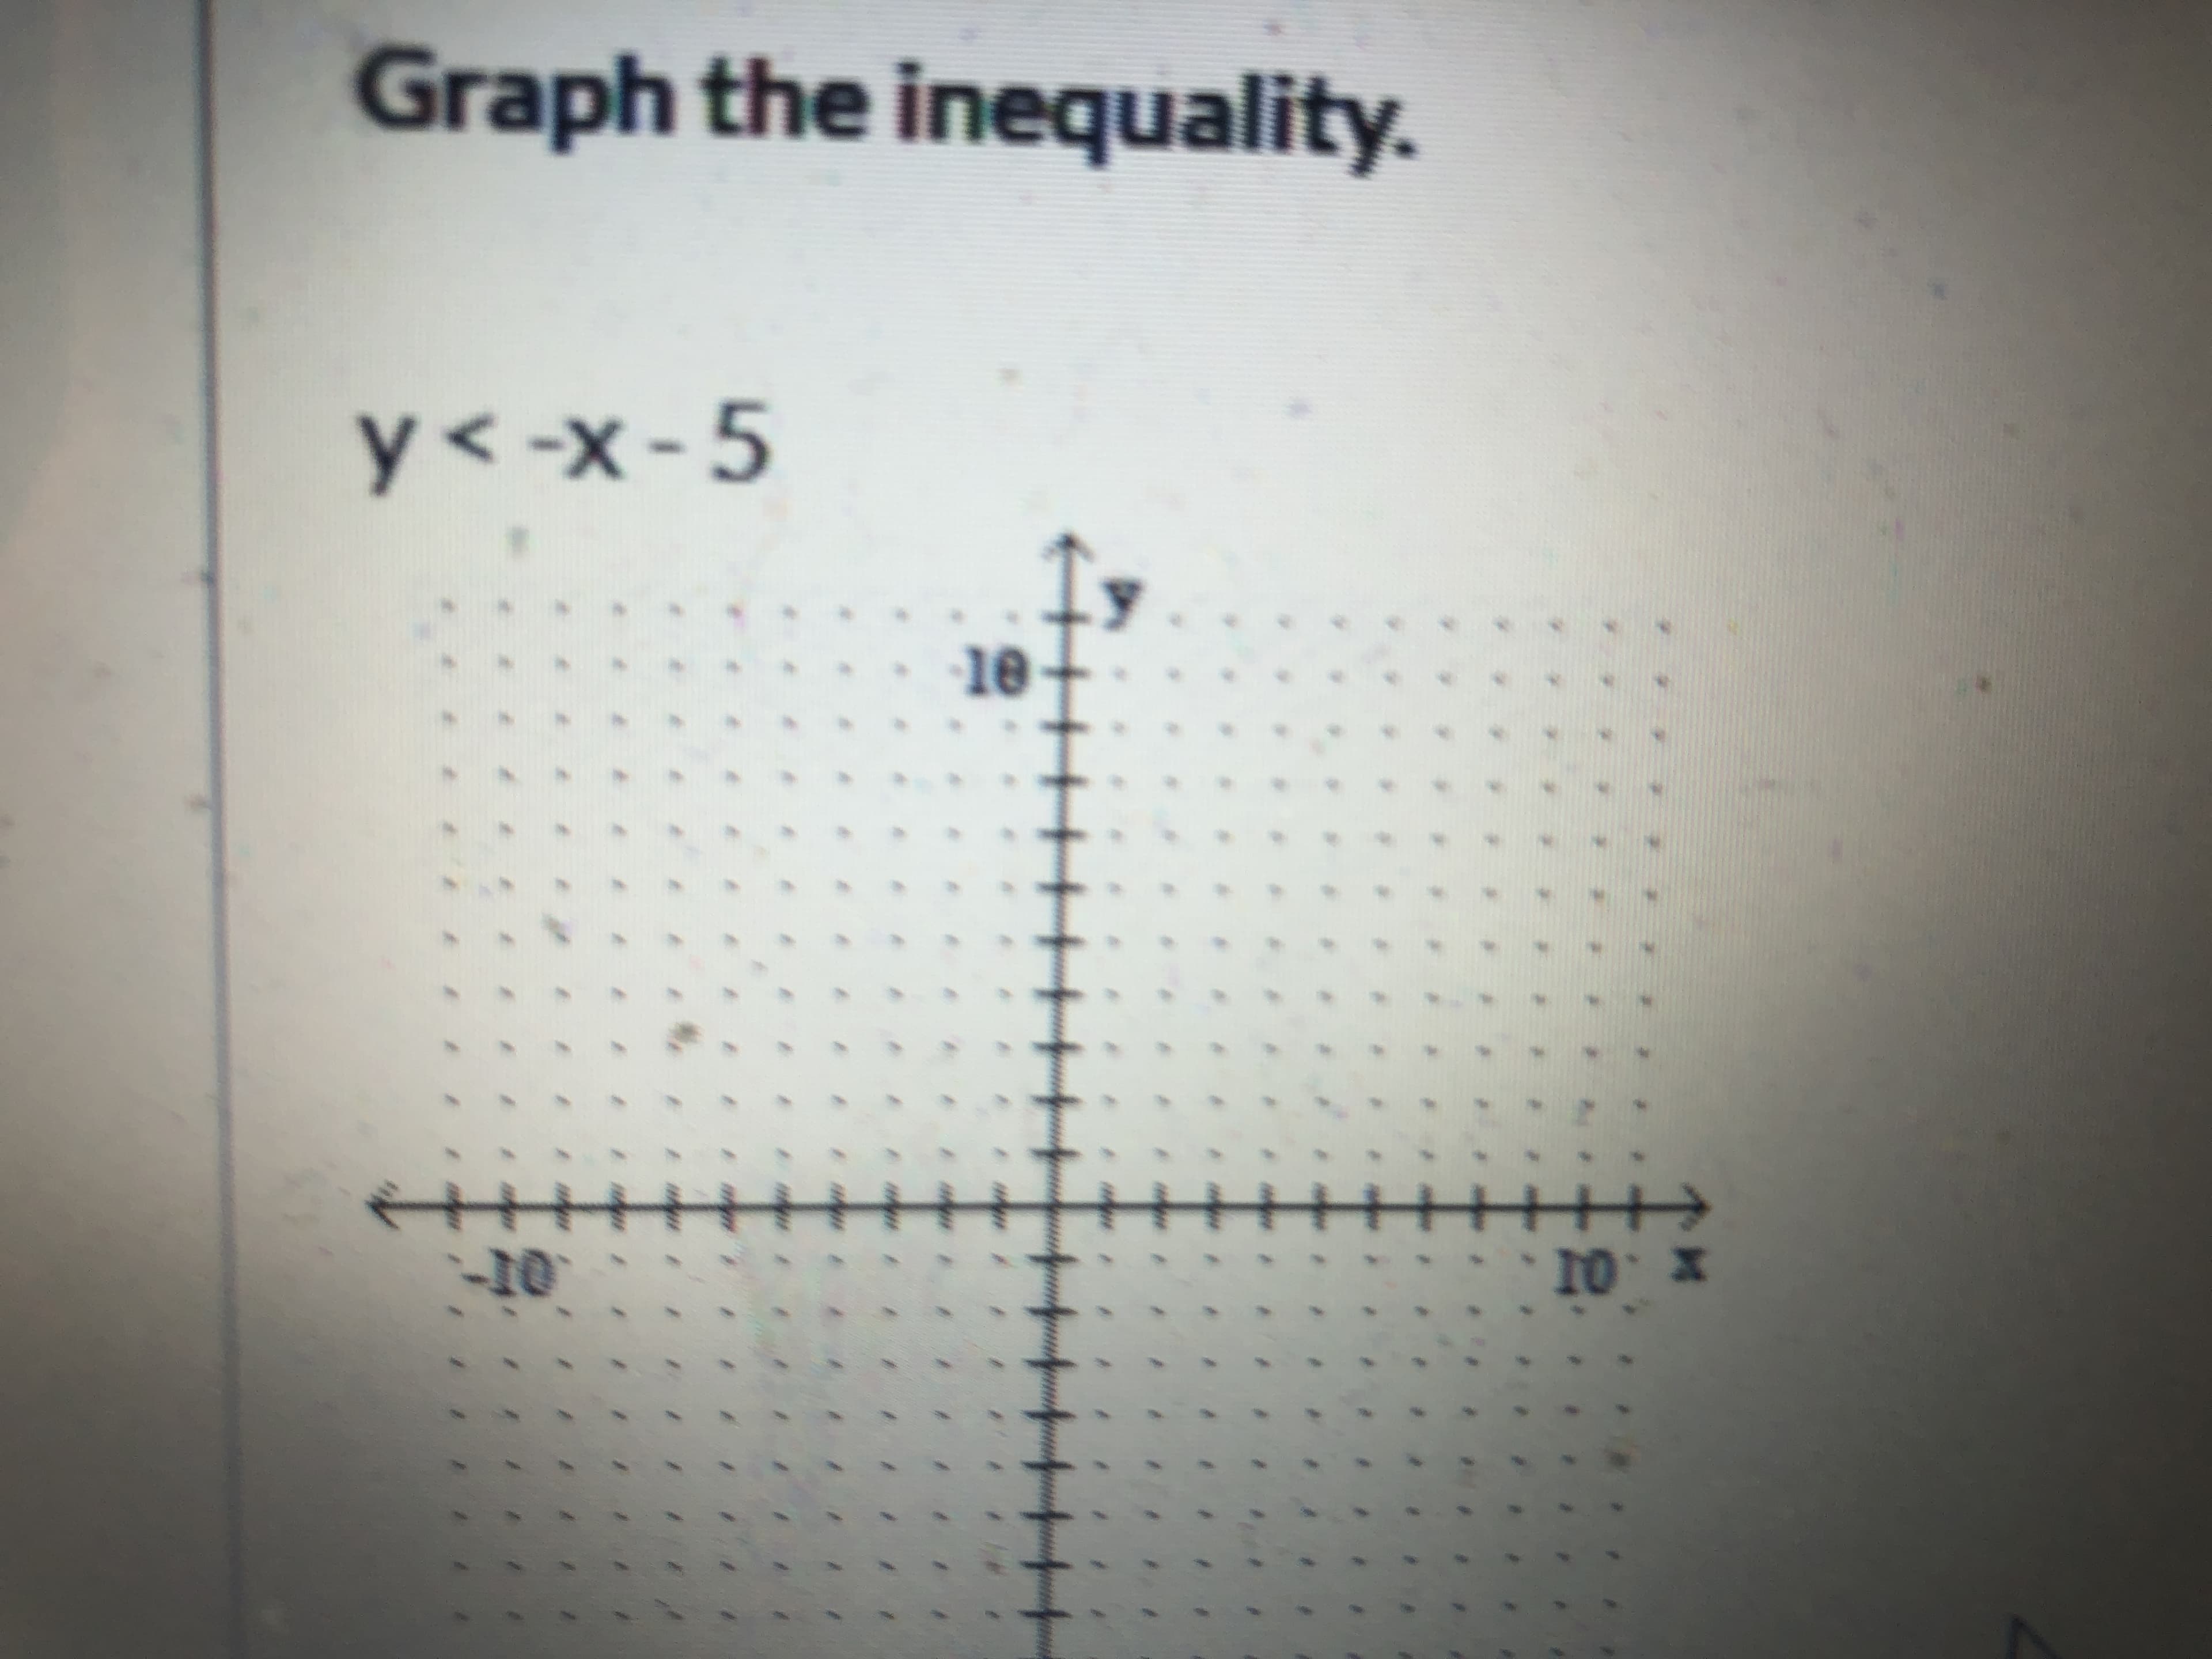 Graph the inequality.
y<-x-5
10
10 X
